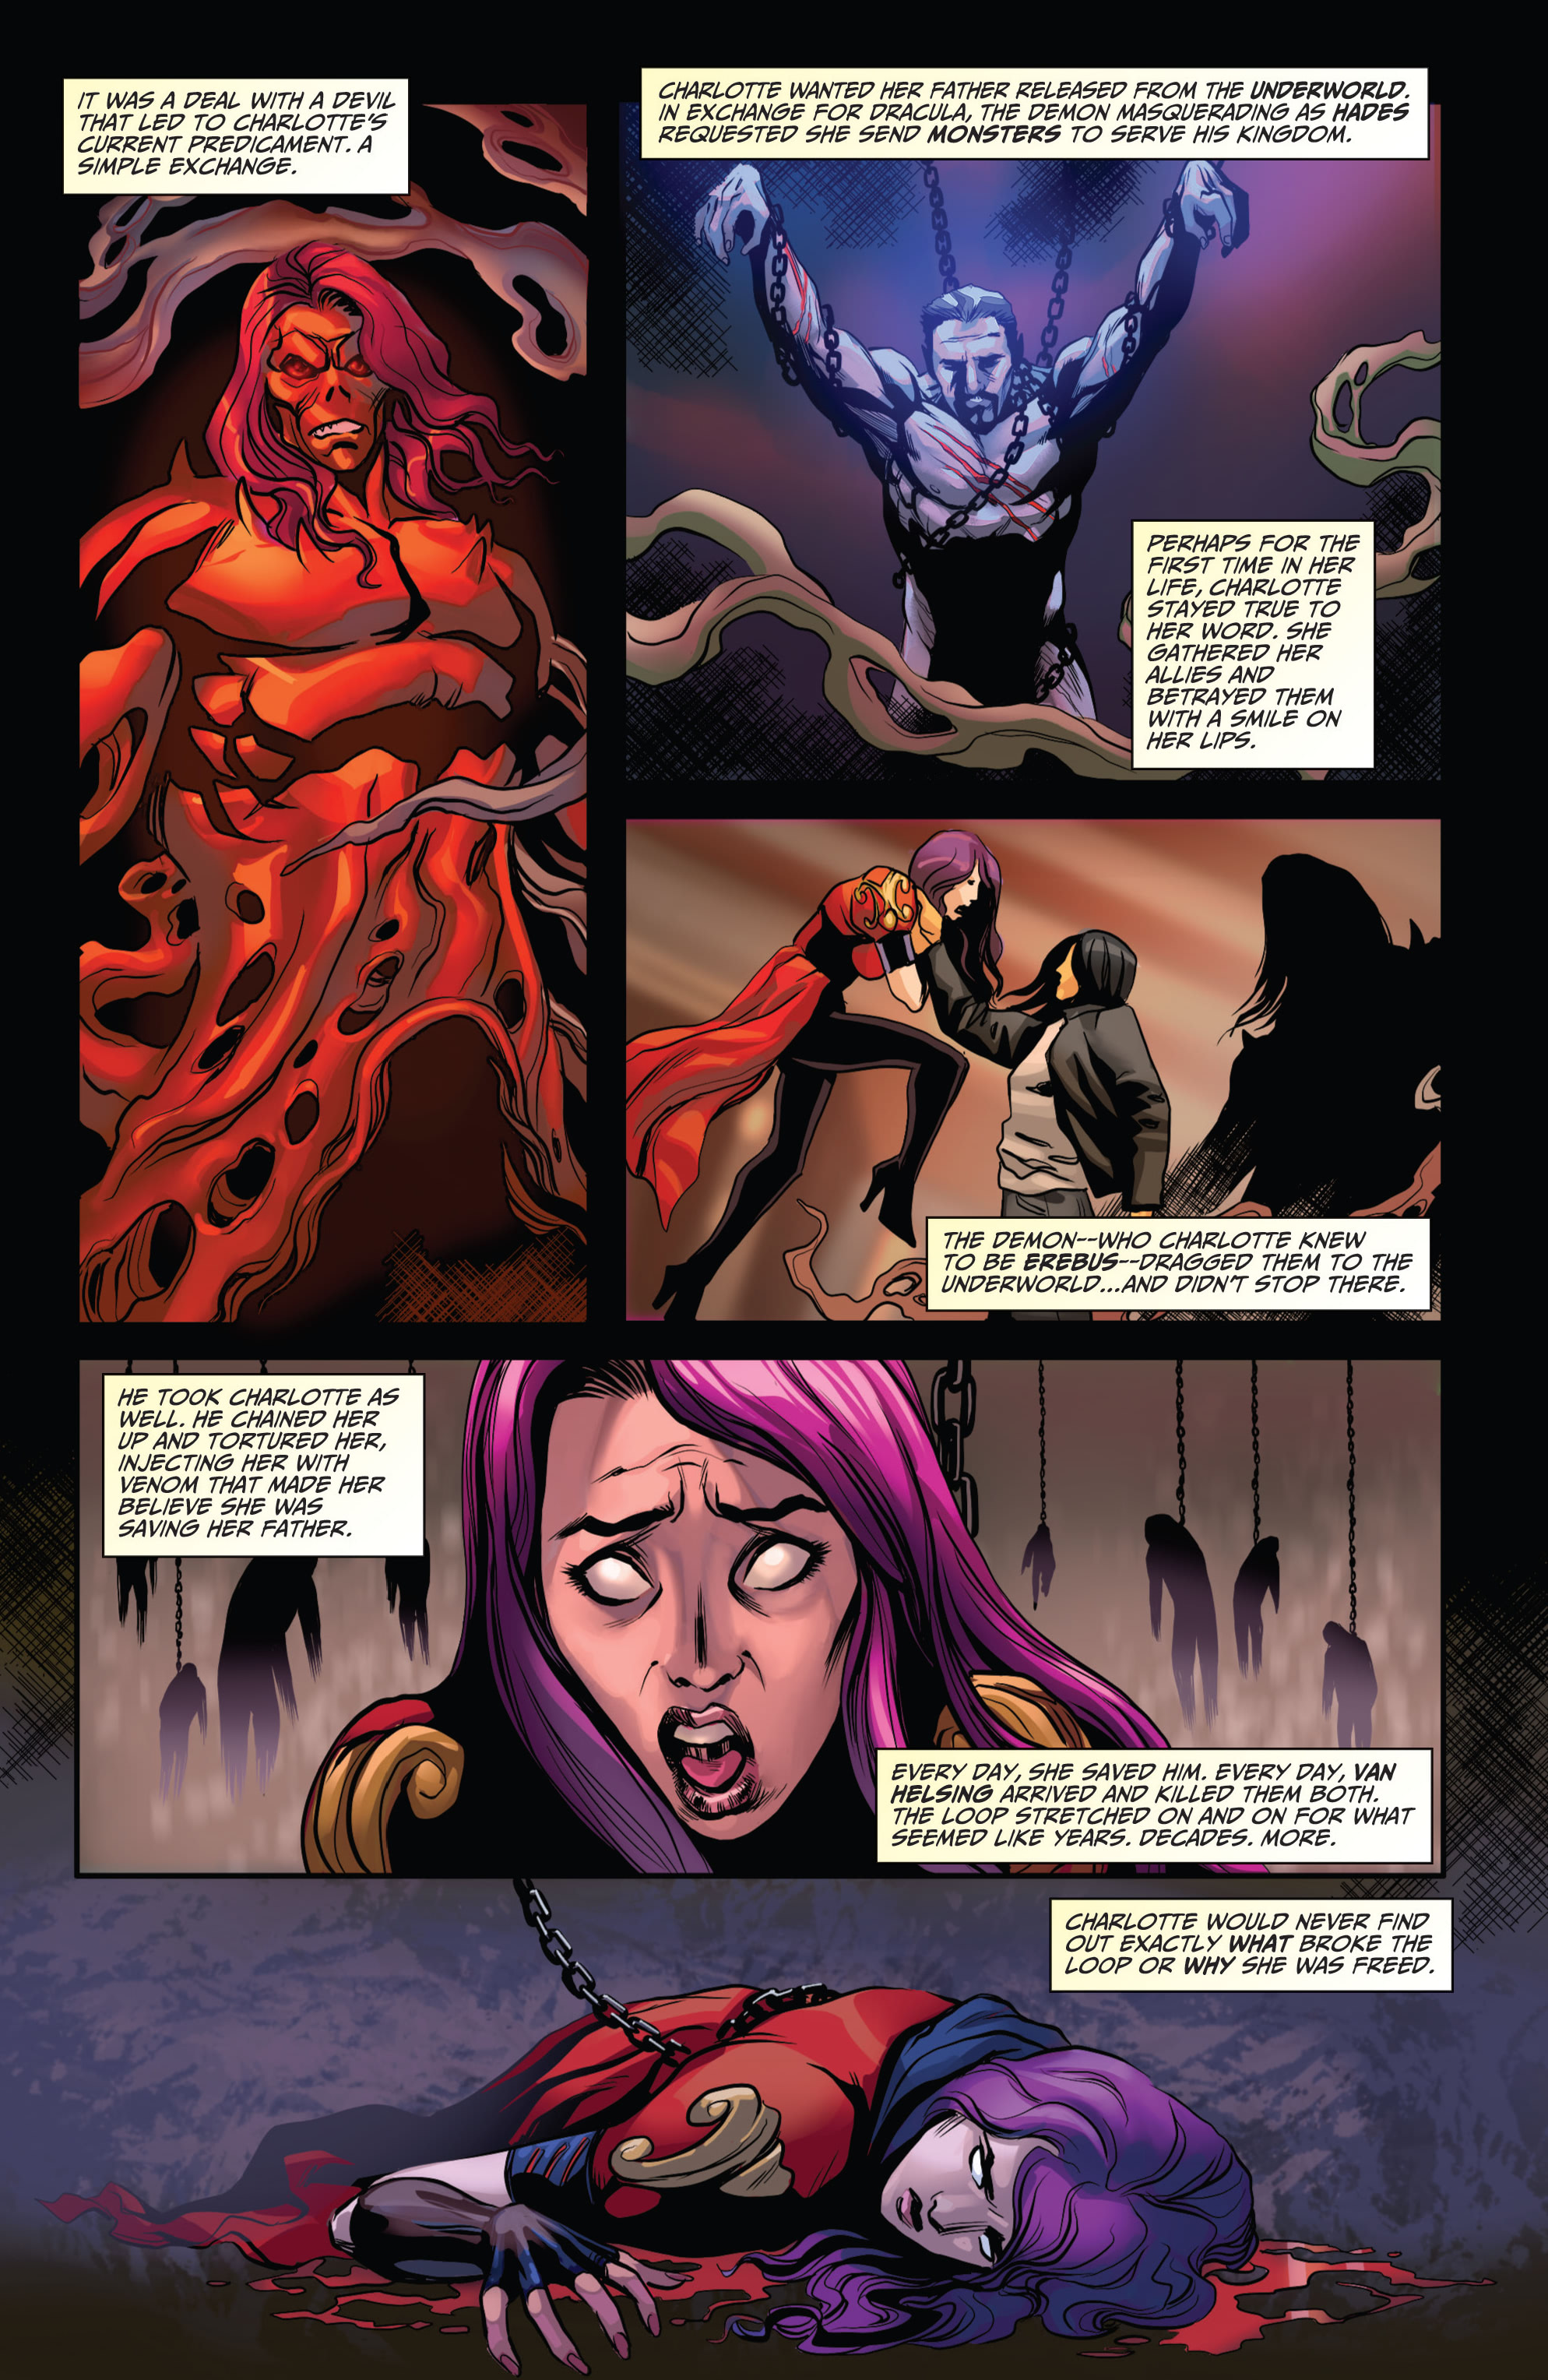 Grimm Universe Presents Quarterly: Dracula's Daughter (2022-): Chapter 1 - Page 4